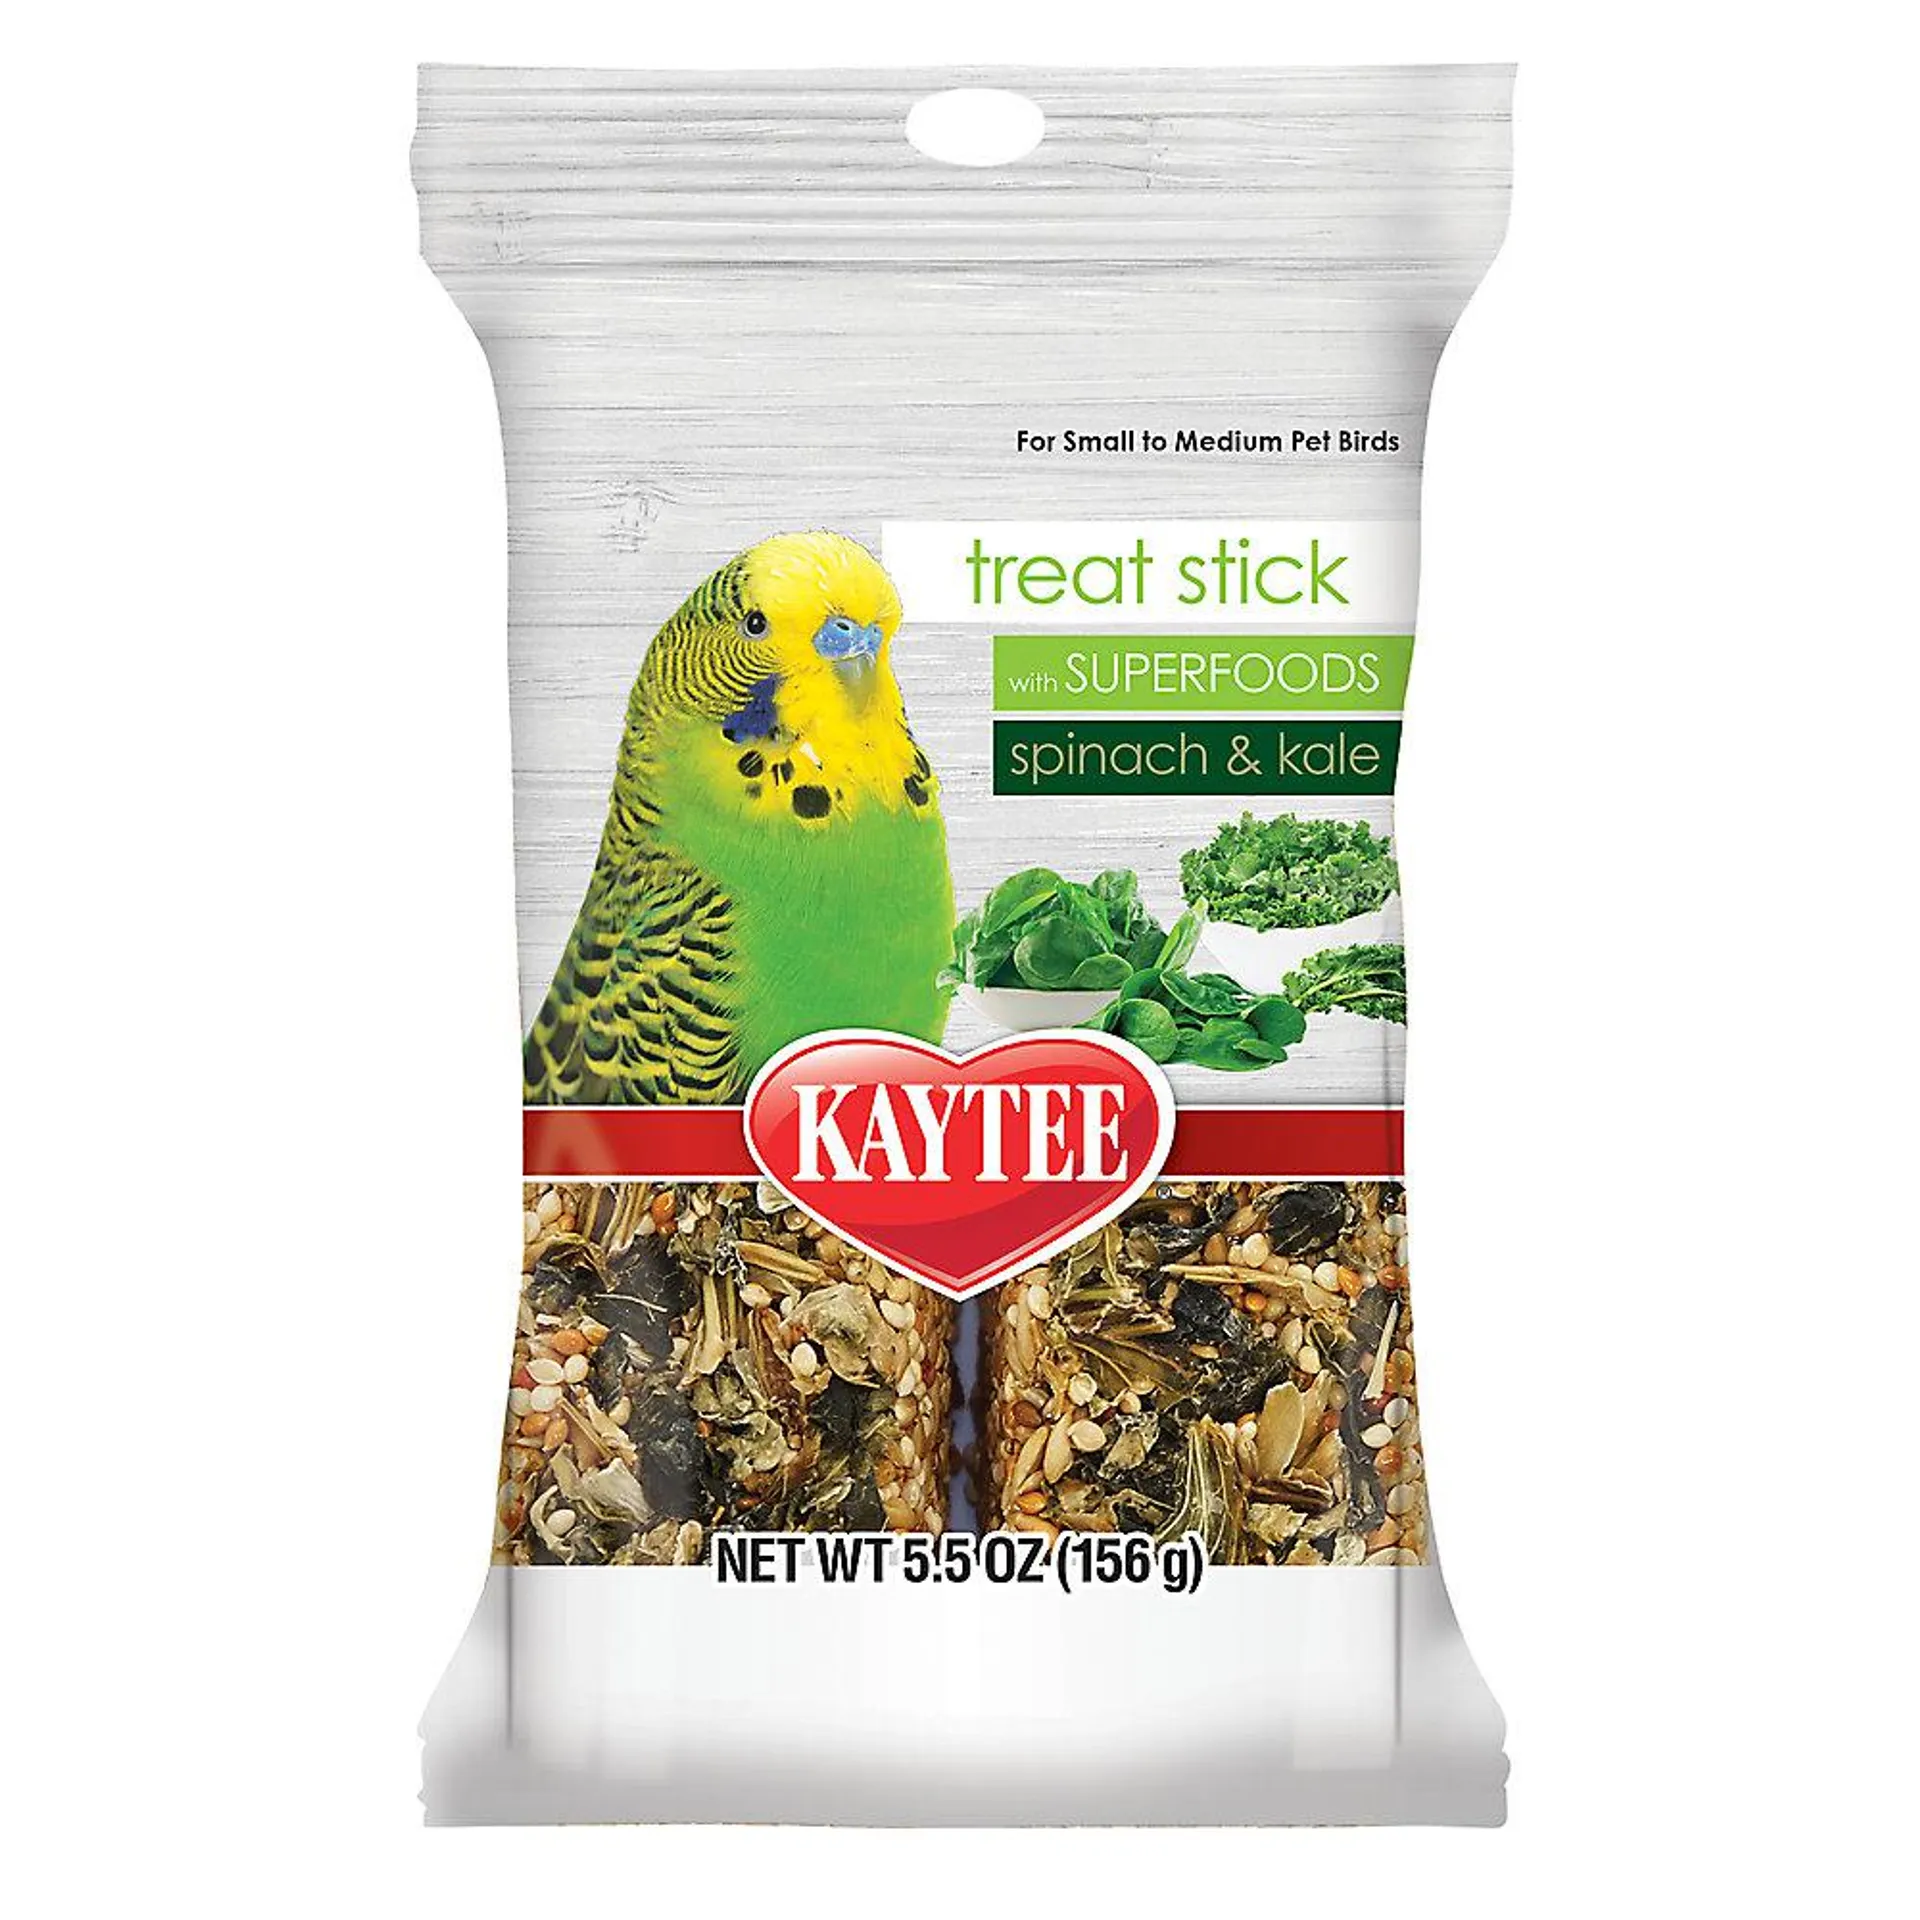 KAYTEE® Treat Stick with Superfoods- Spinach/Kale